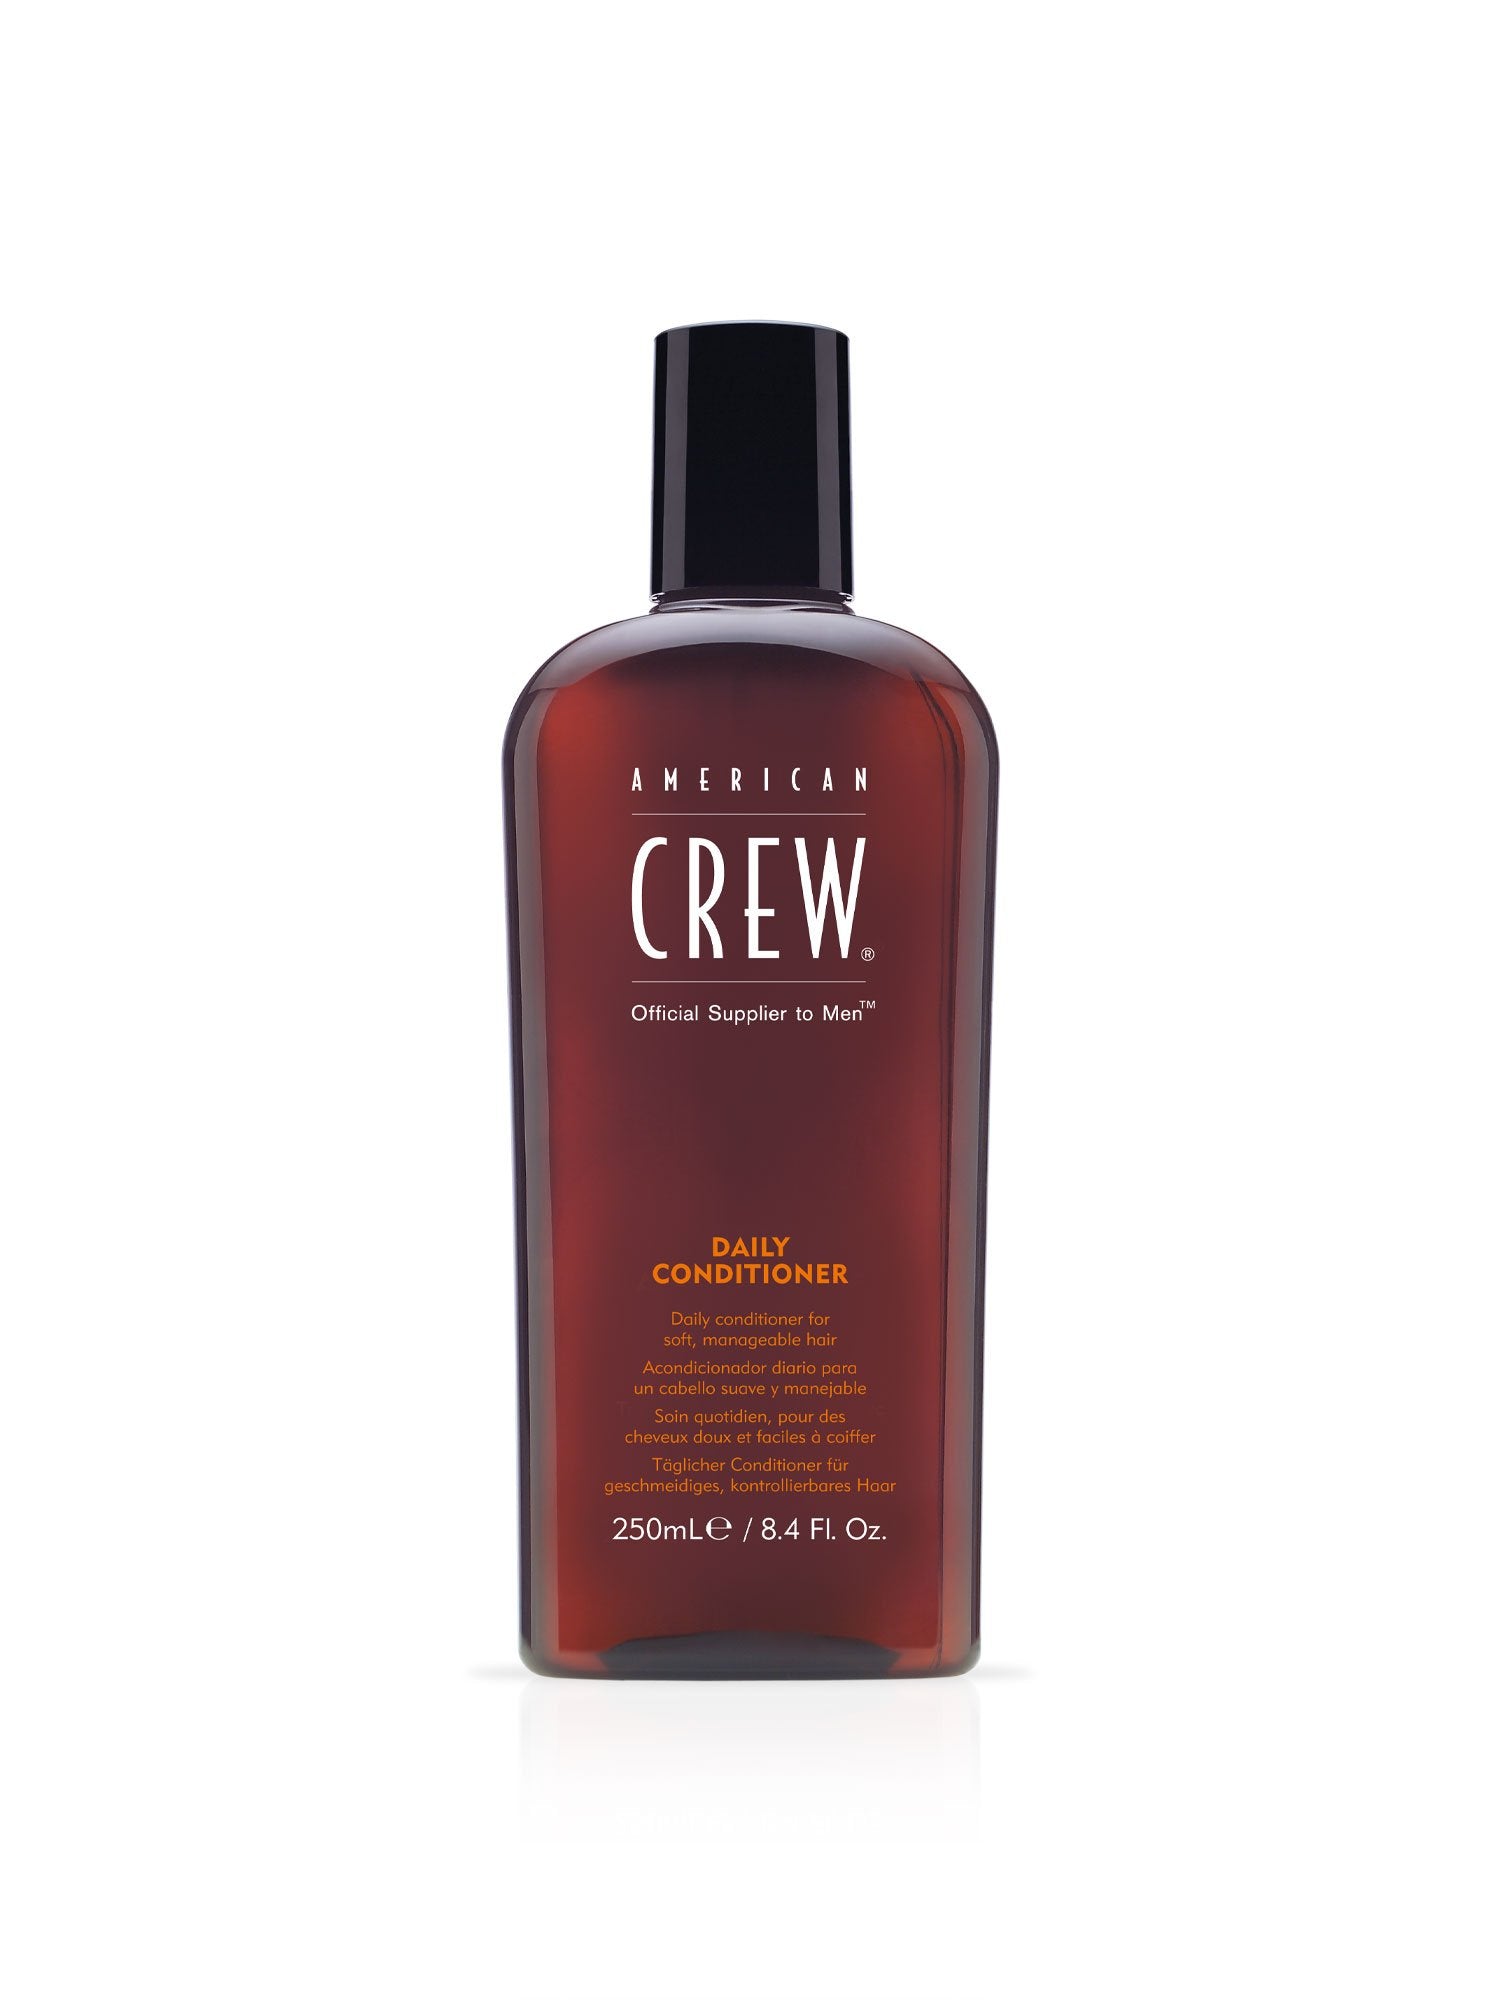 American Crew - Daily Conditioner - 250ml - ProCare Outlet by American Crew